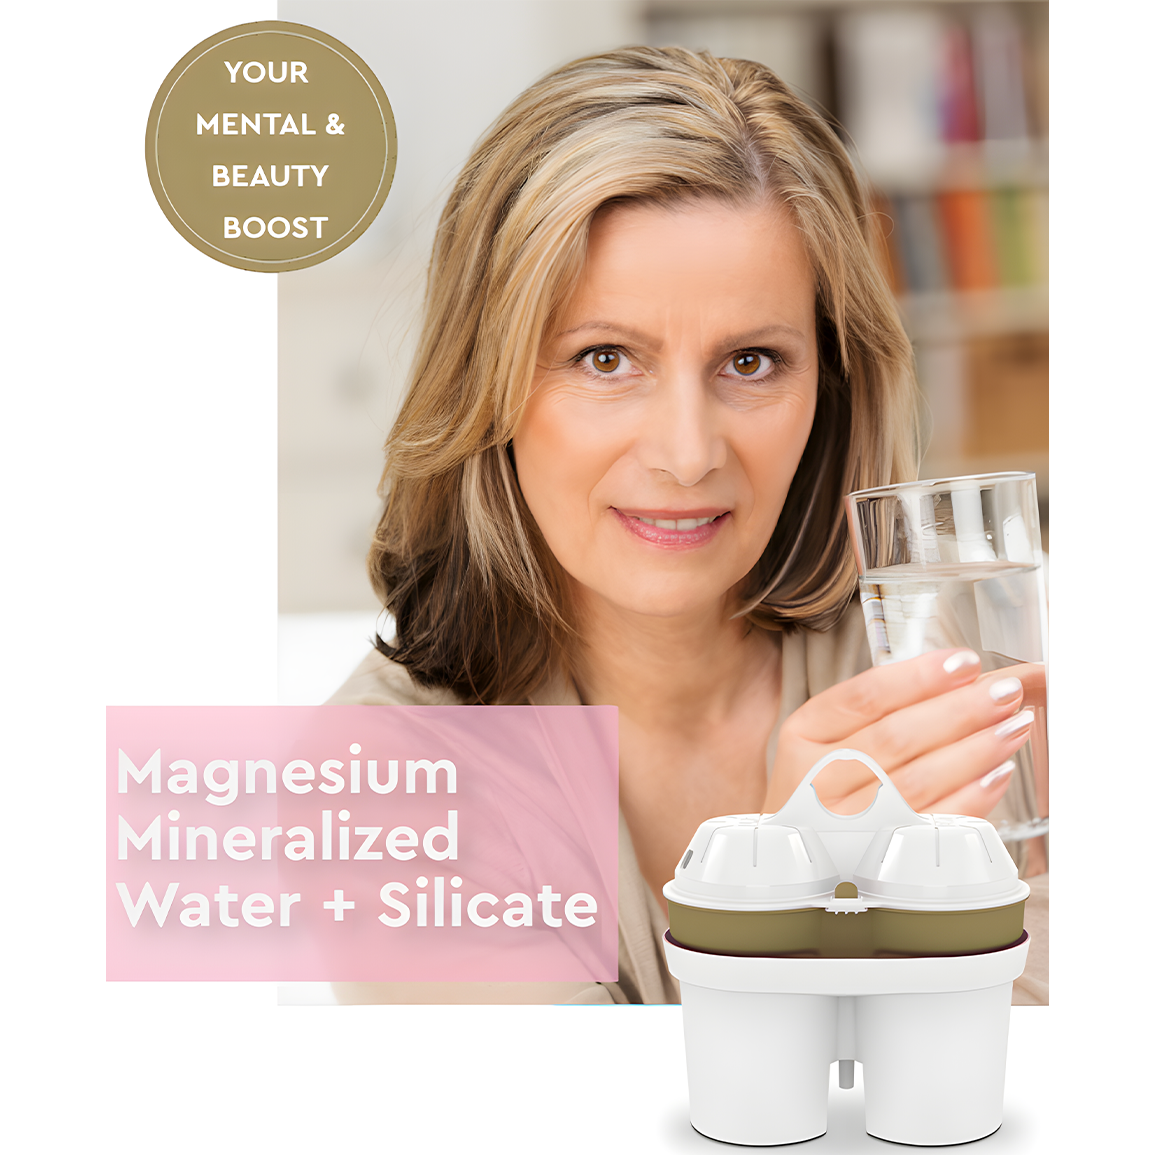 Magnesium Mineralized Water + Silicate